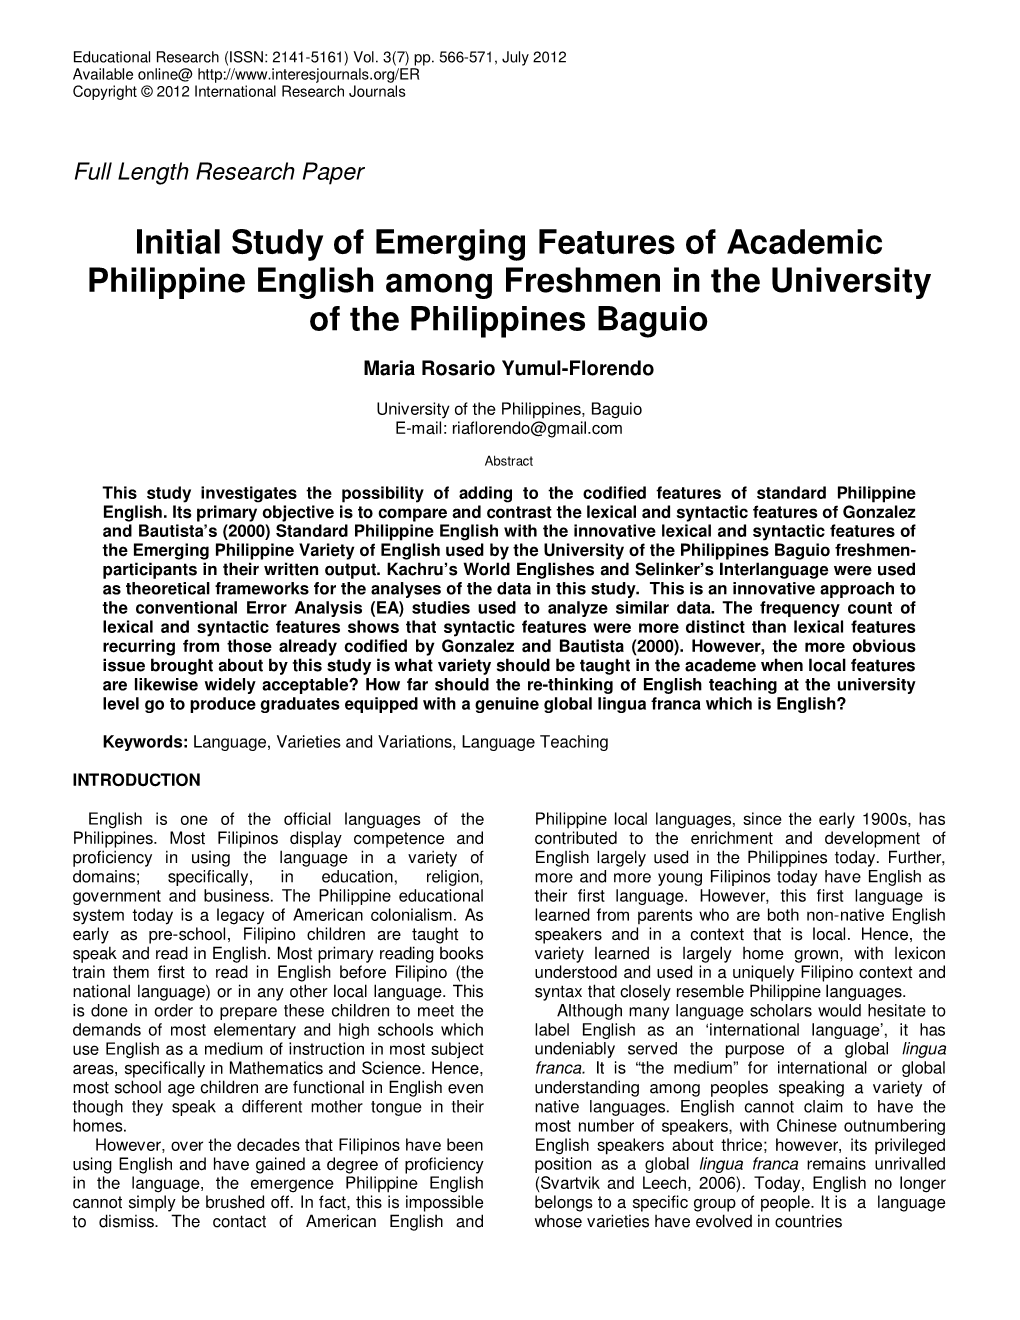 Initial Study of Emerging Features of Academic Philippine English Among Freshmen in the University of the Philippines Baguio